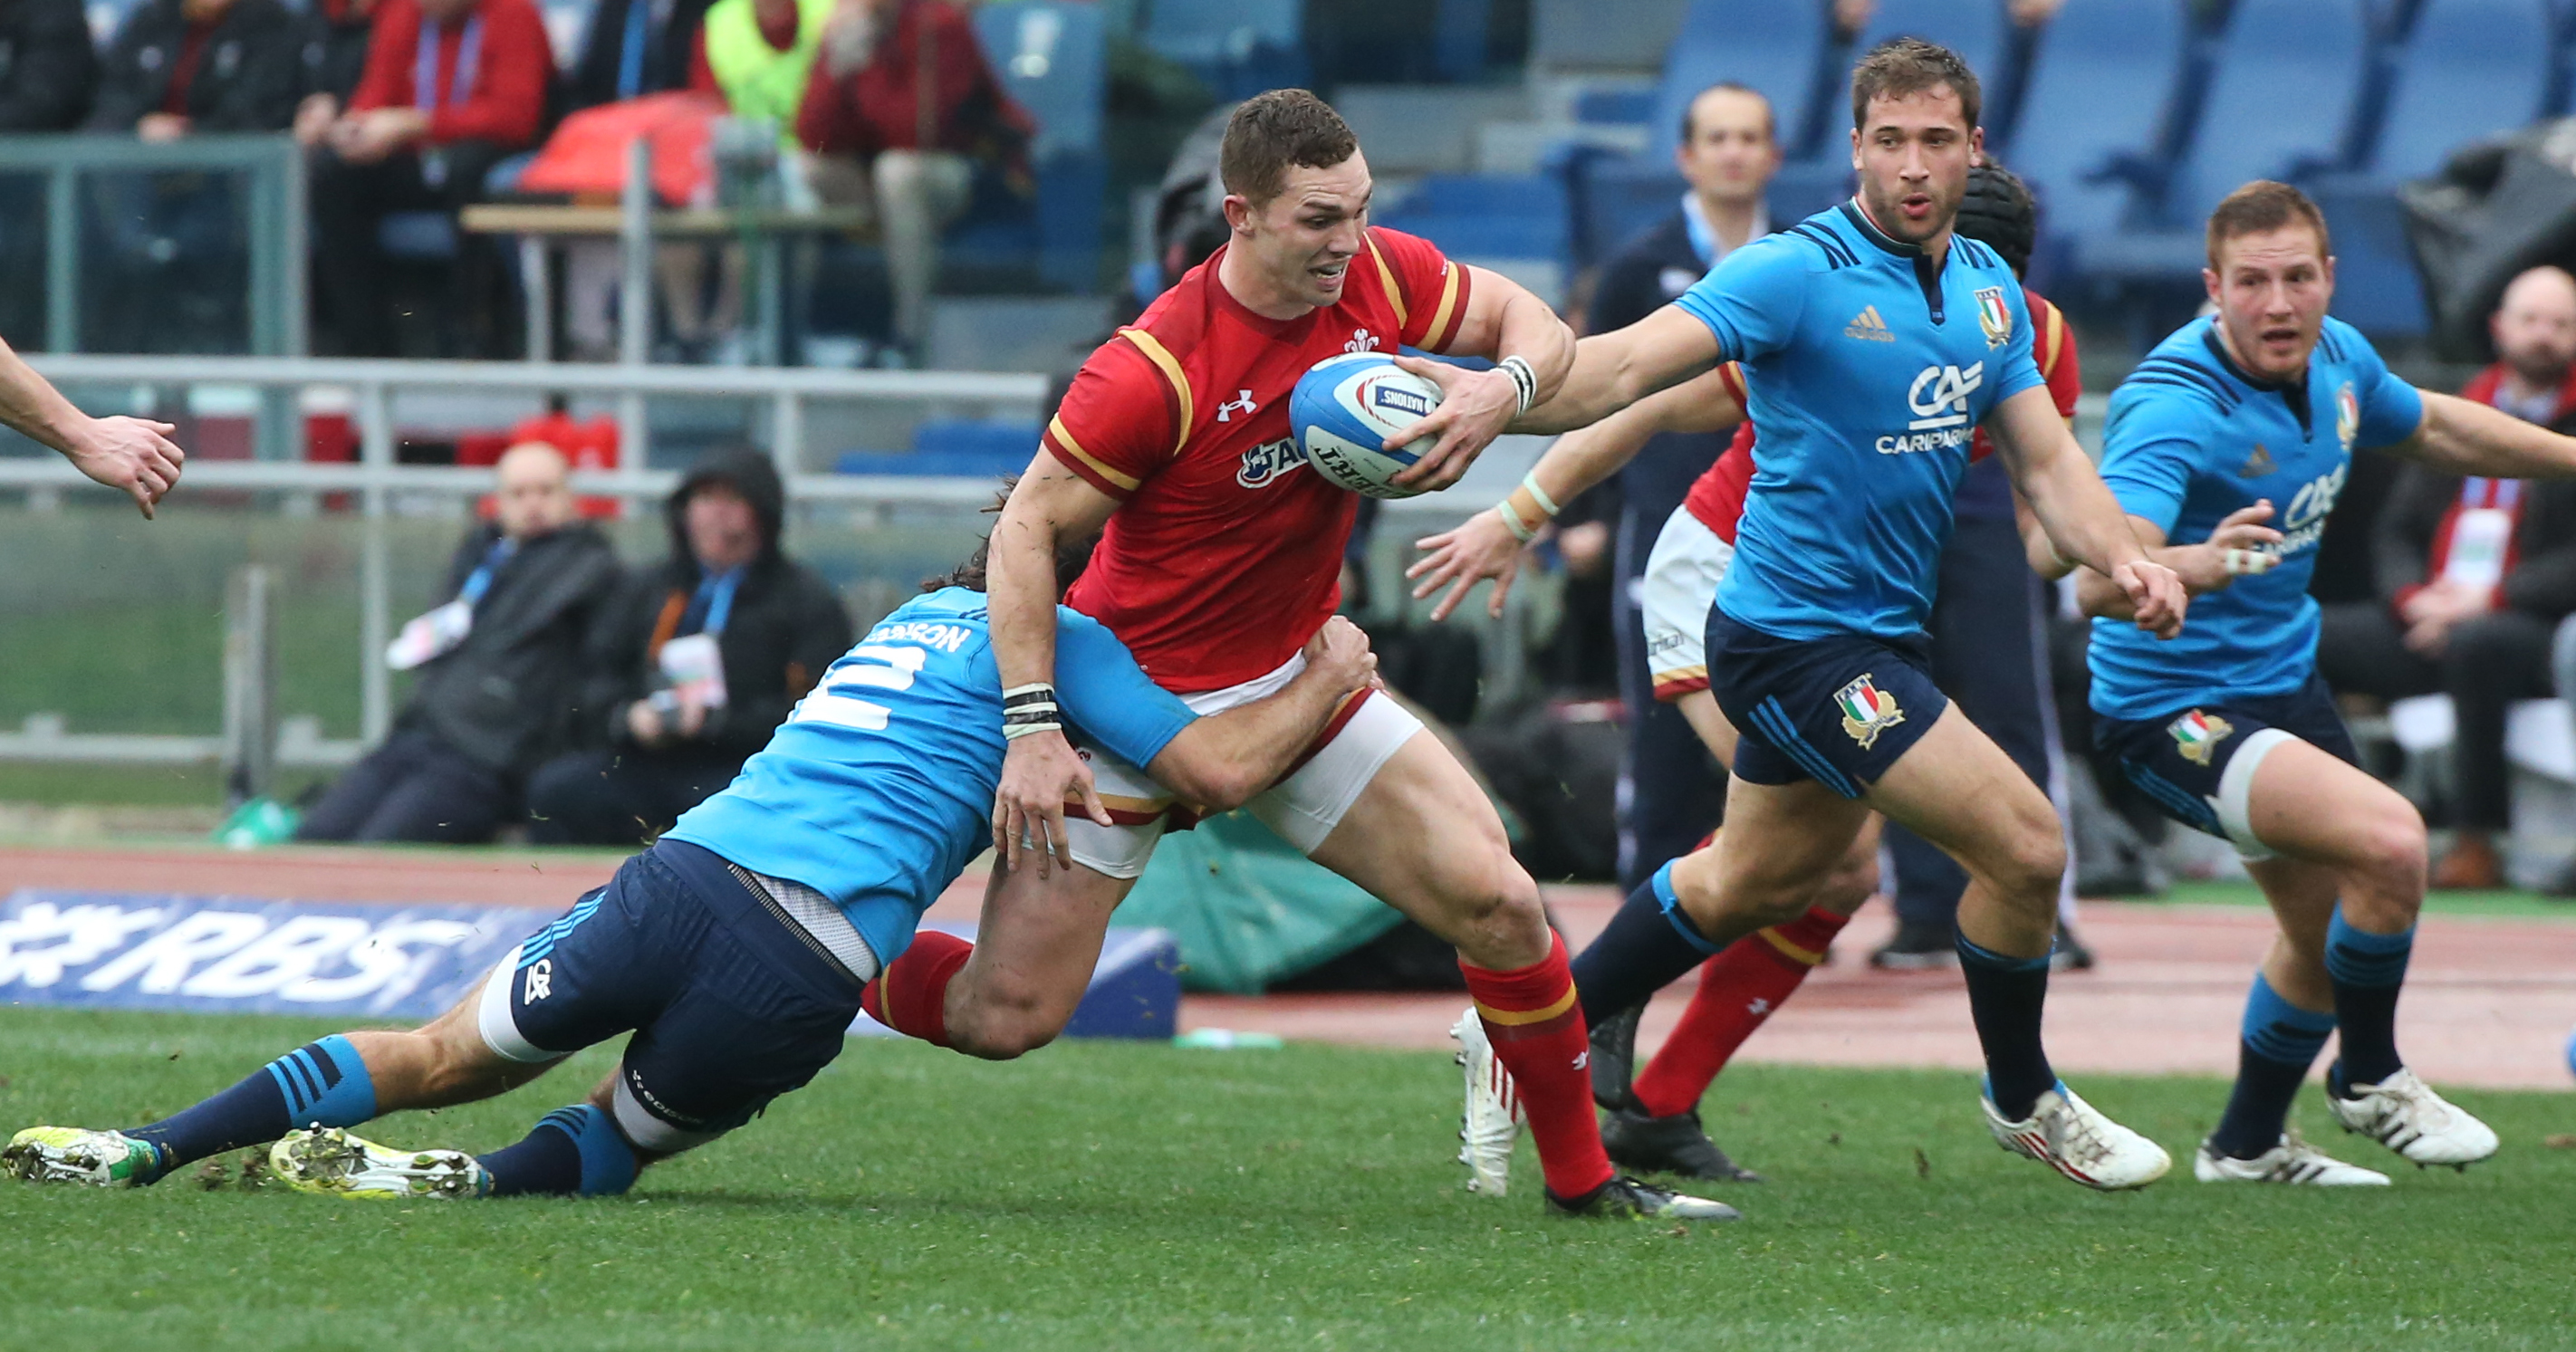 Rugby: Wales trample Italy in Six Nations opener